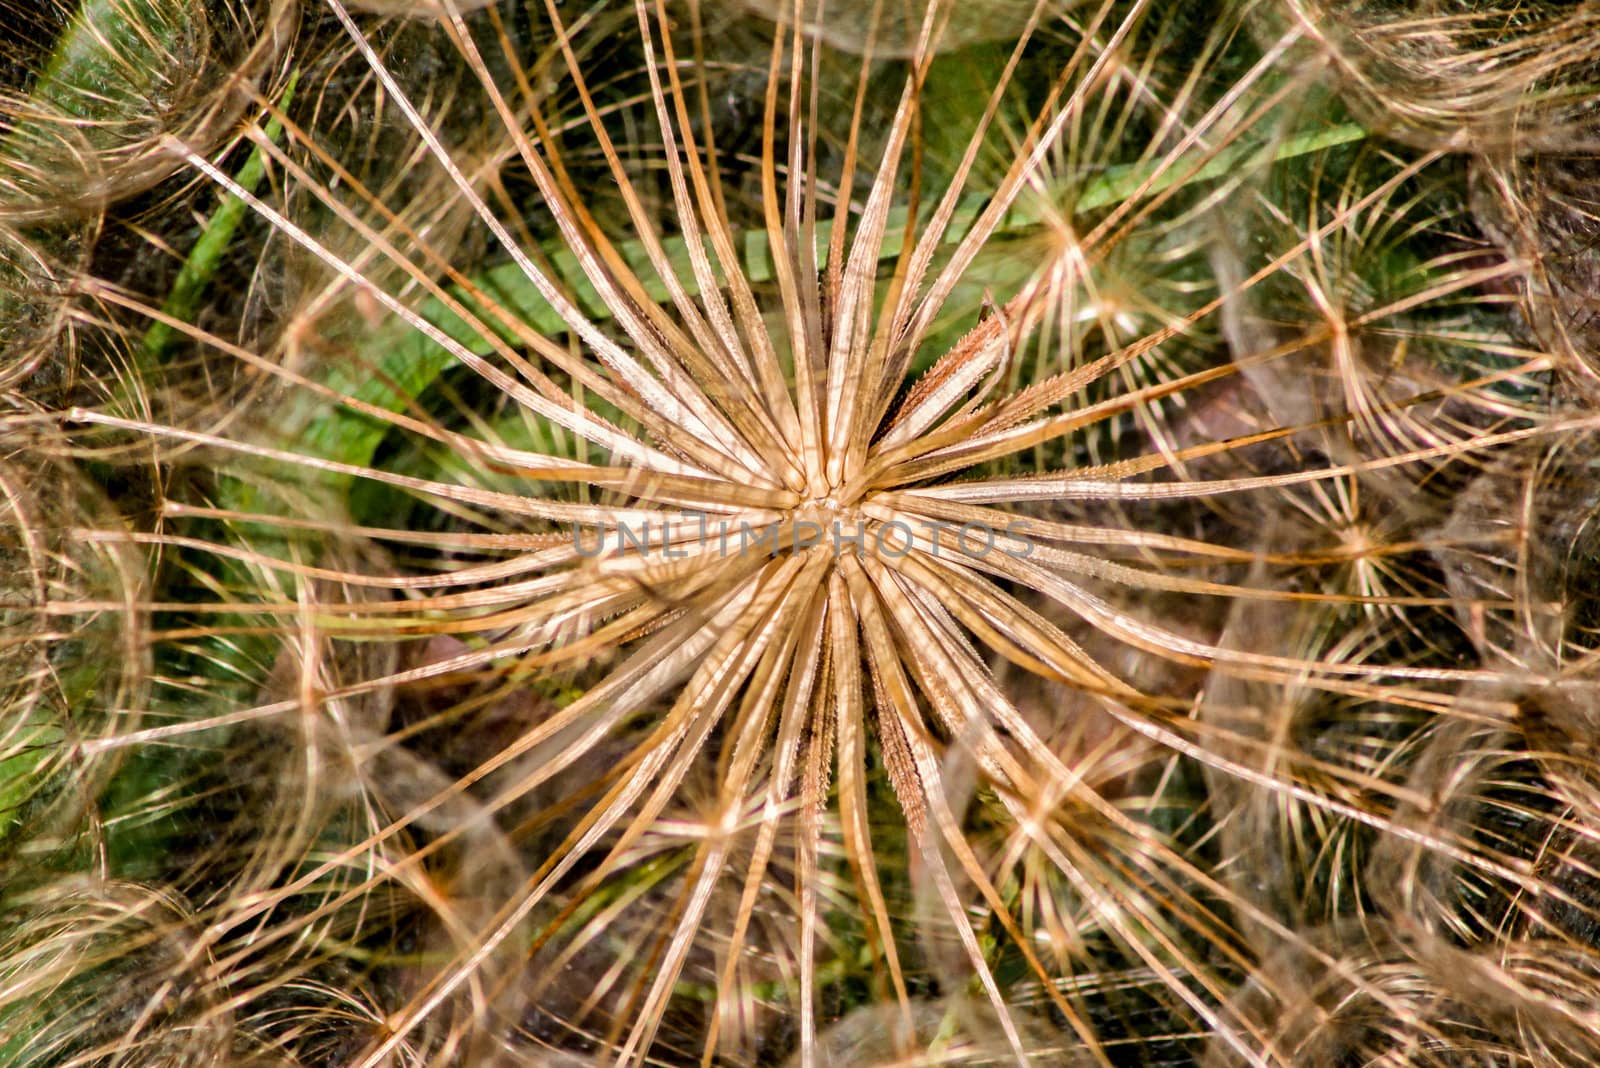 A Dandelion about ready to spread its seeds.